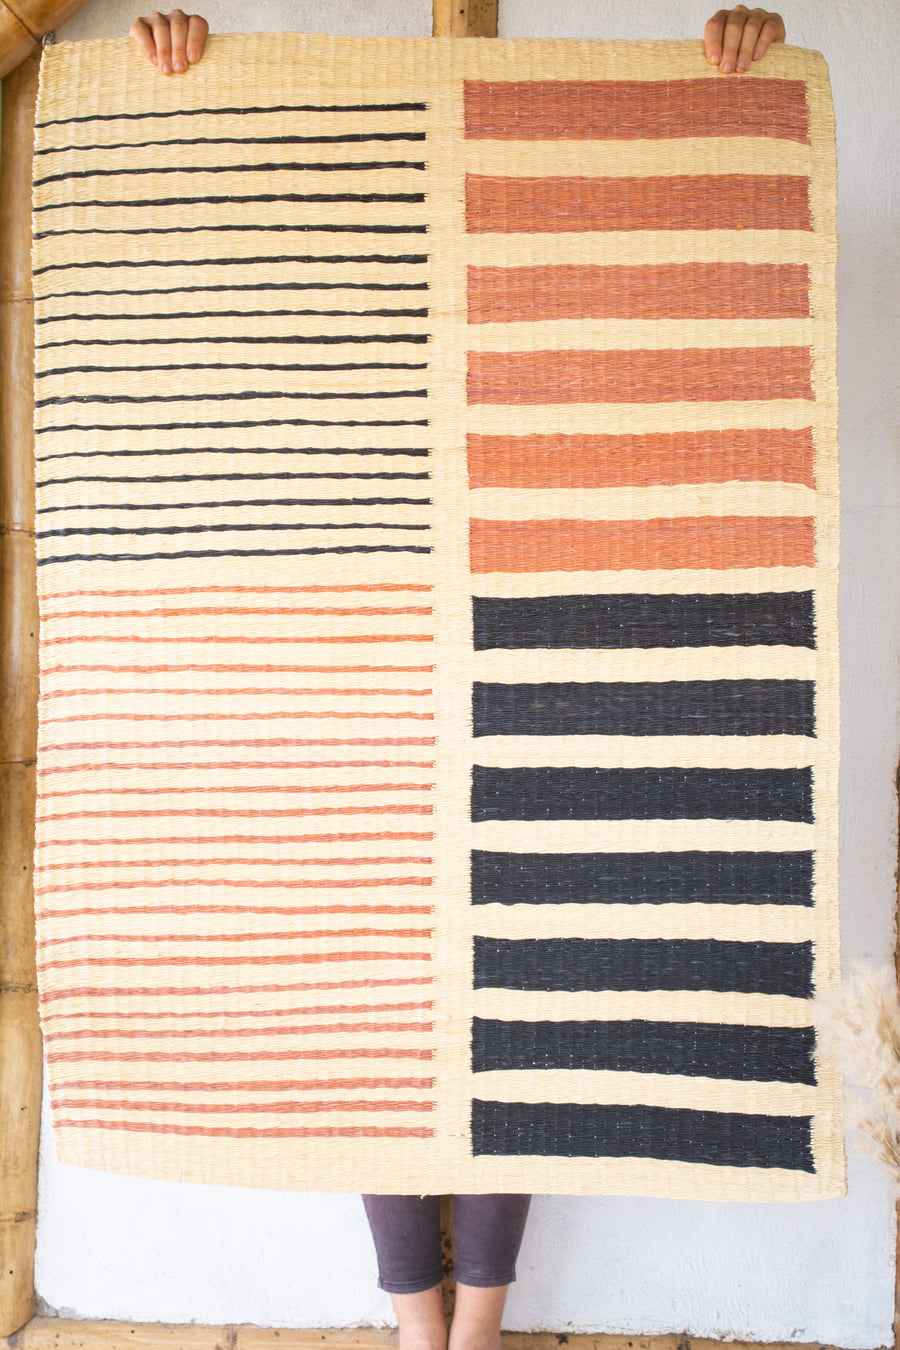 Contemporary palm weaving used as a rug or wall ahnging. Plant dyed and handwoven made in Colombia.